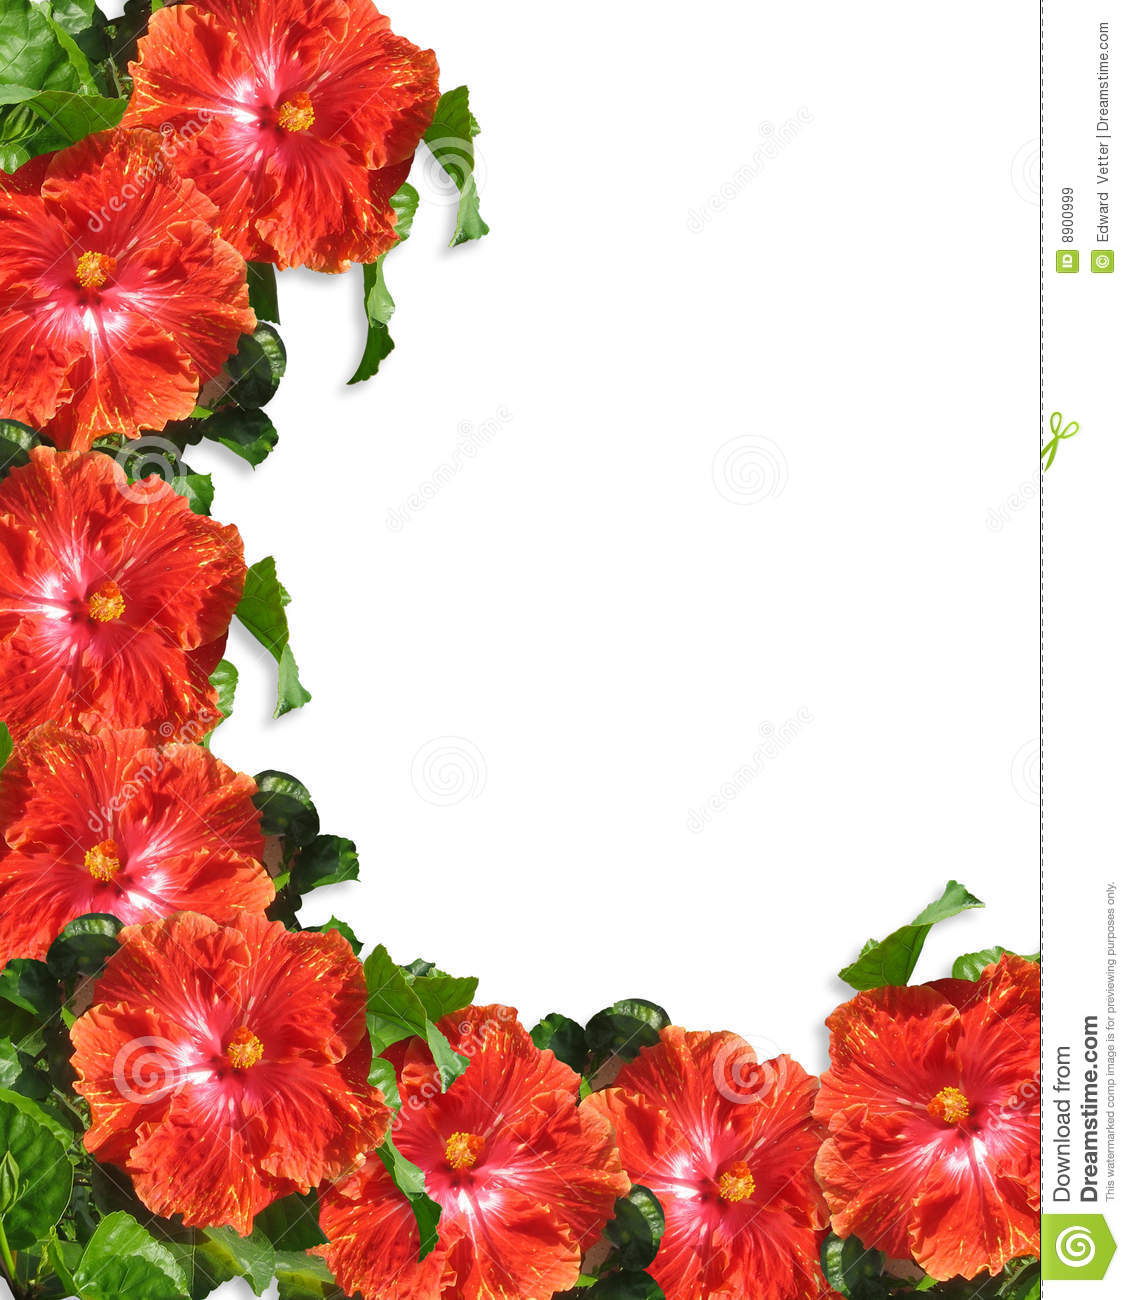 Dreamstime Comhibiscus Flowers Border Background Royalty Free Stock